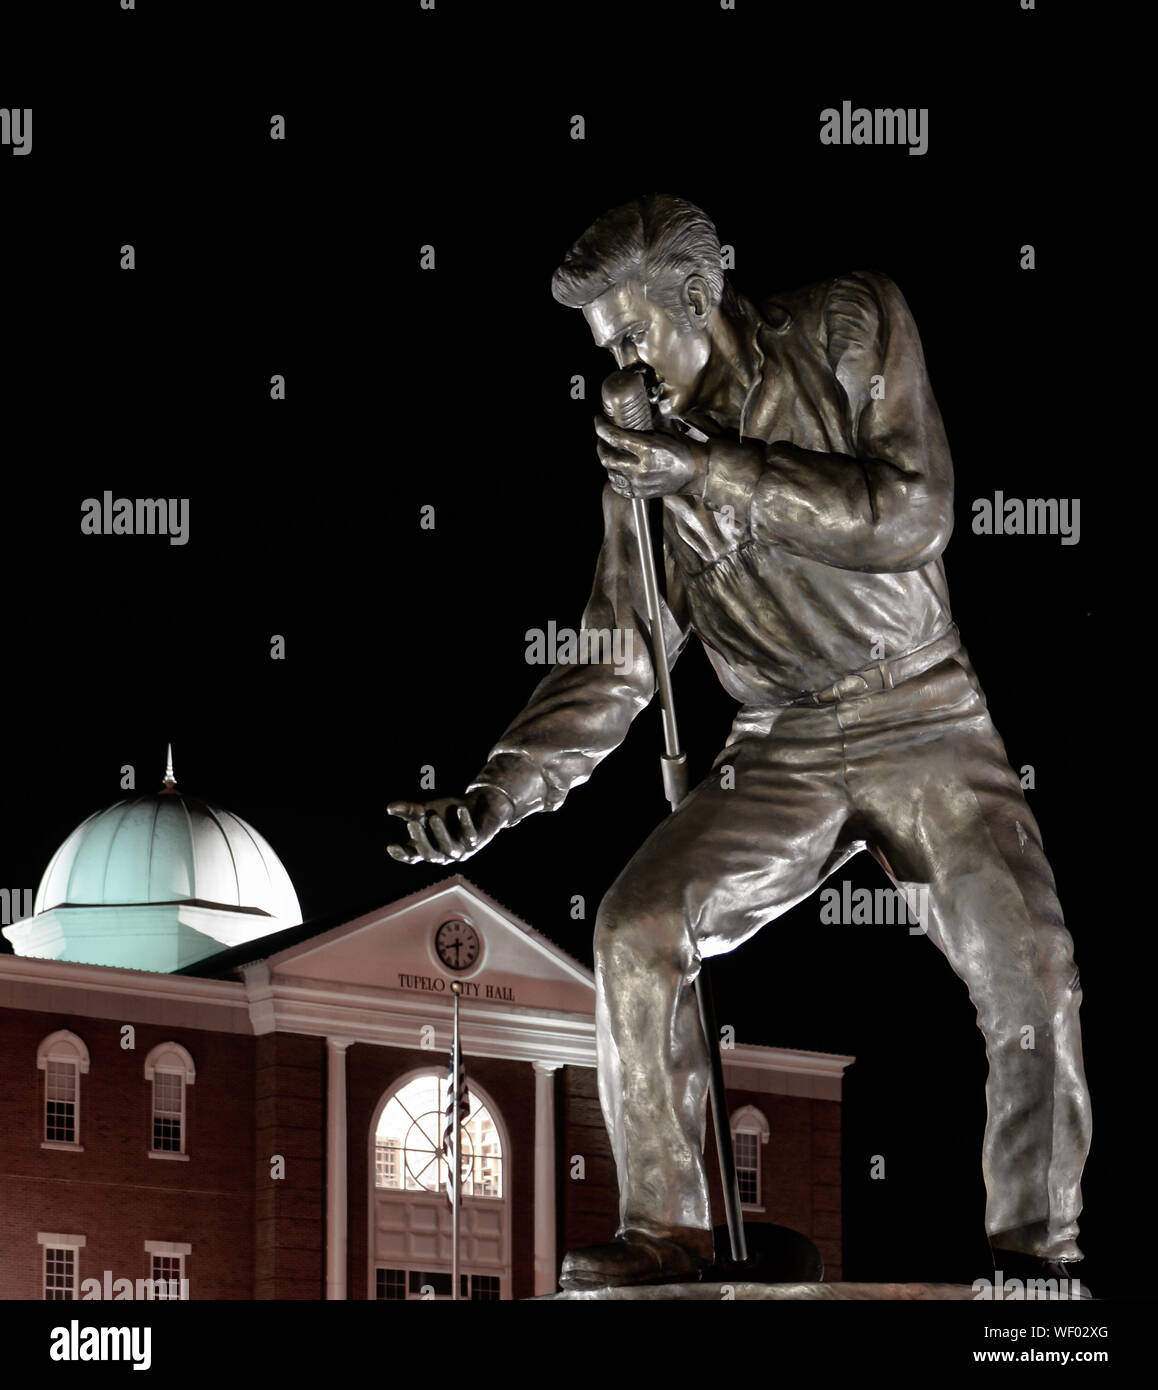 Elvis Presley statue in bronze pose with microphone and outstretched hand, at night by the Tupelo City Hall in Tupelo, MS, USA Stock Photo